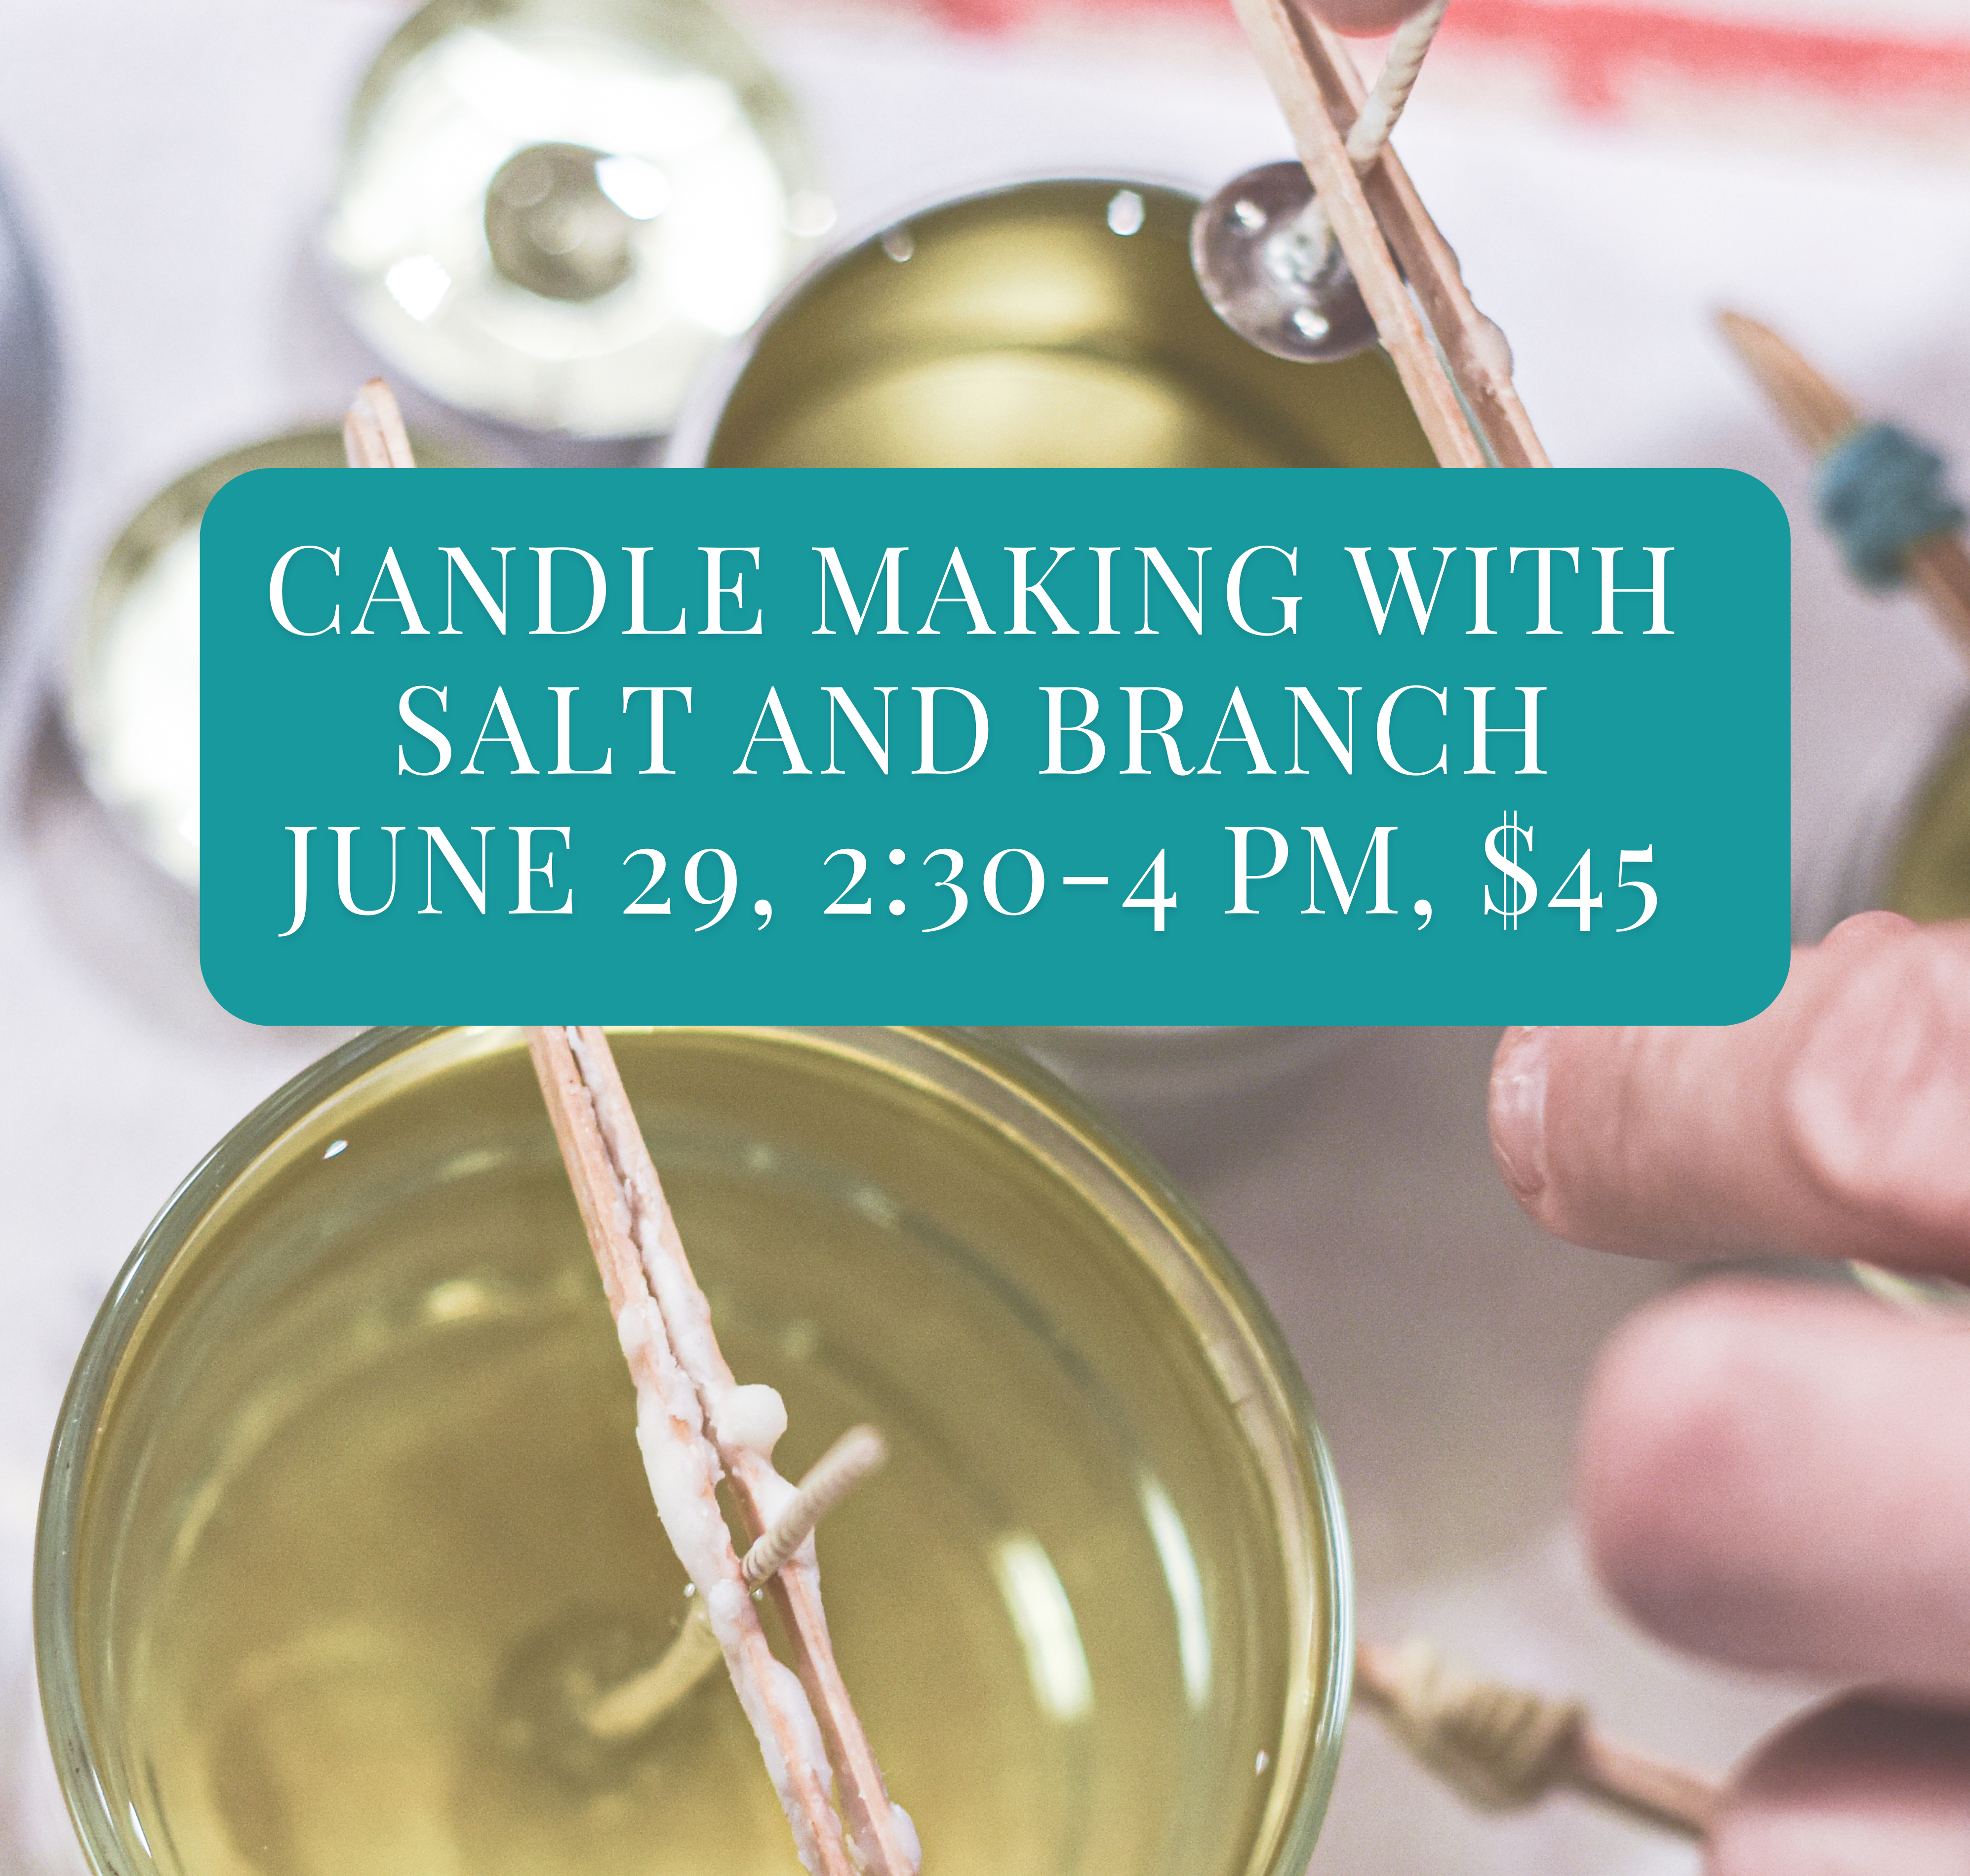 Image of flyer for Candle Making at Boston Harbor Distillery